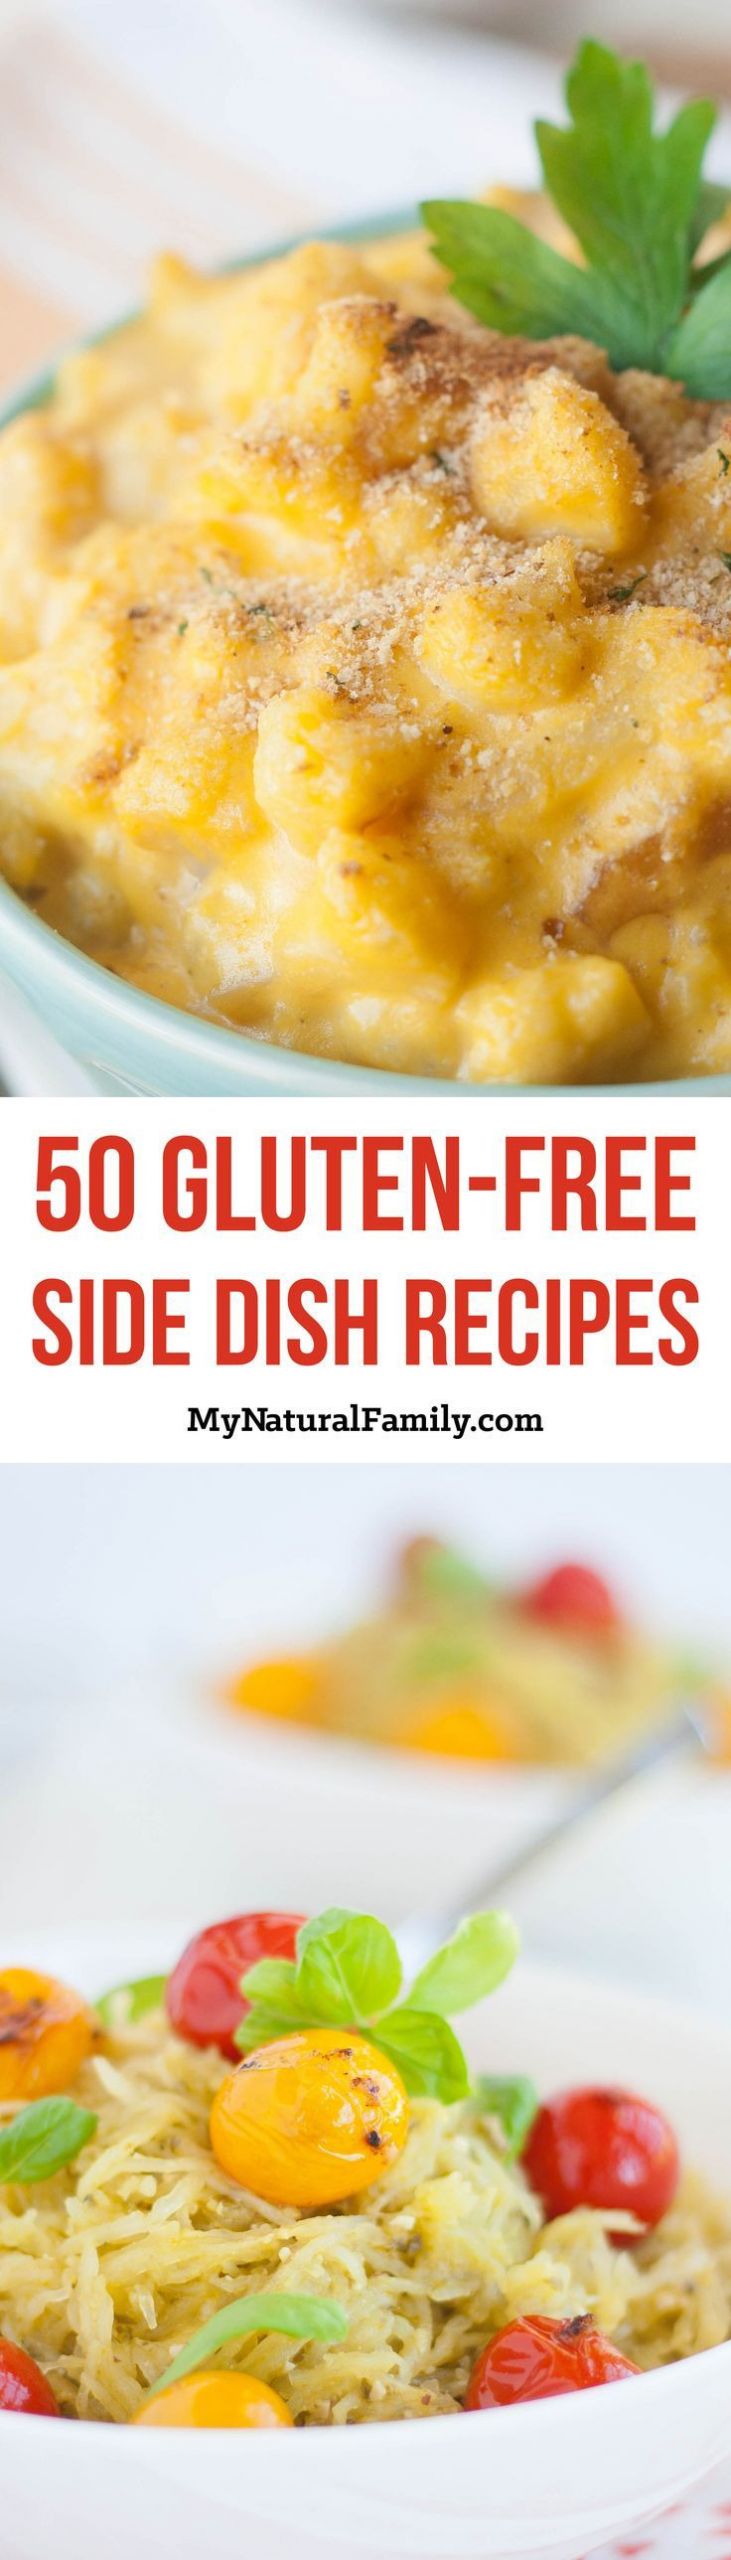 Gluten Free Dairy Free Side Dishes
 1000 images about Is It Really Gluten Free on Pinterest